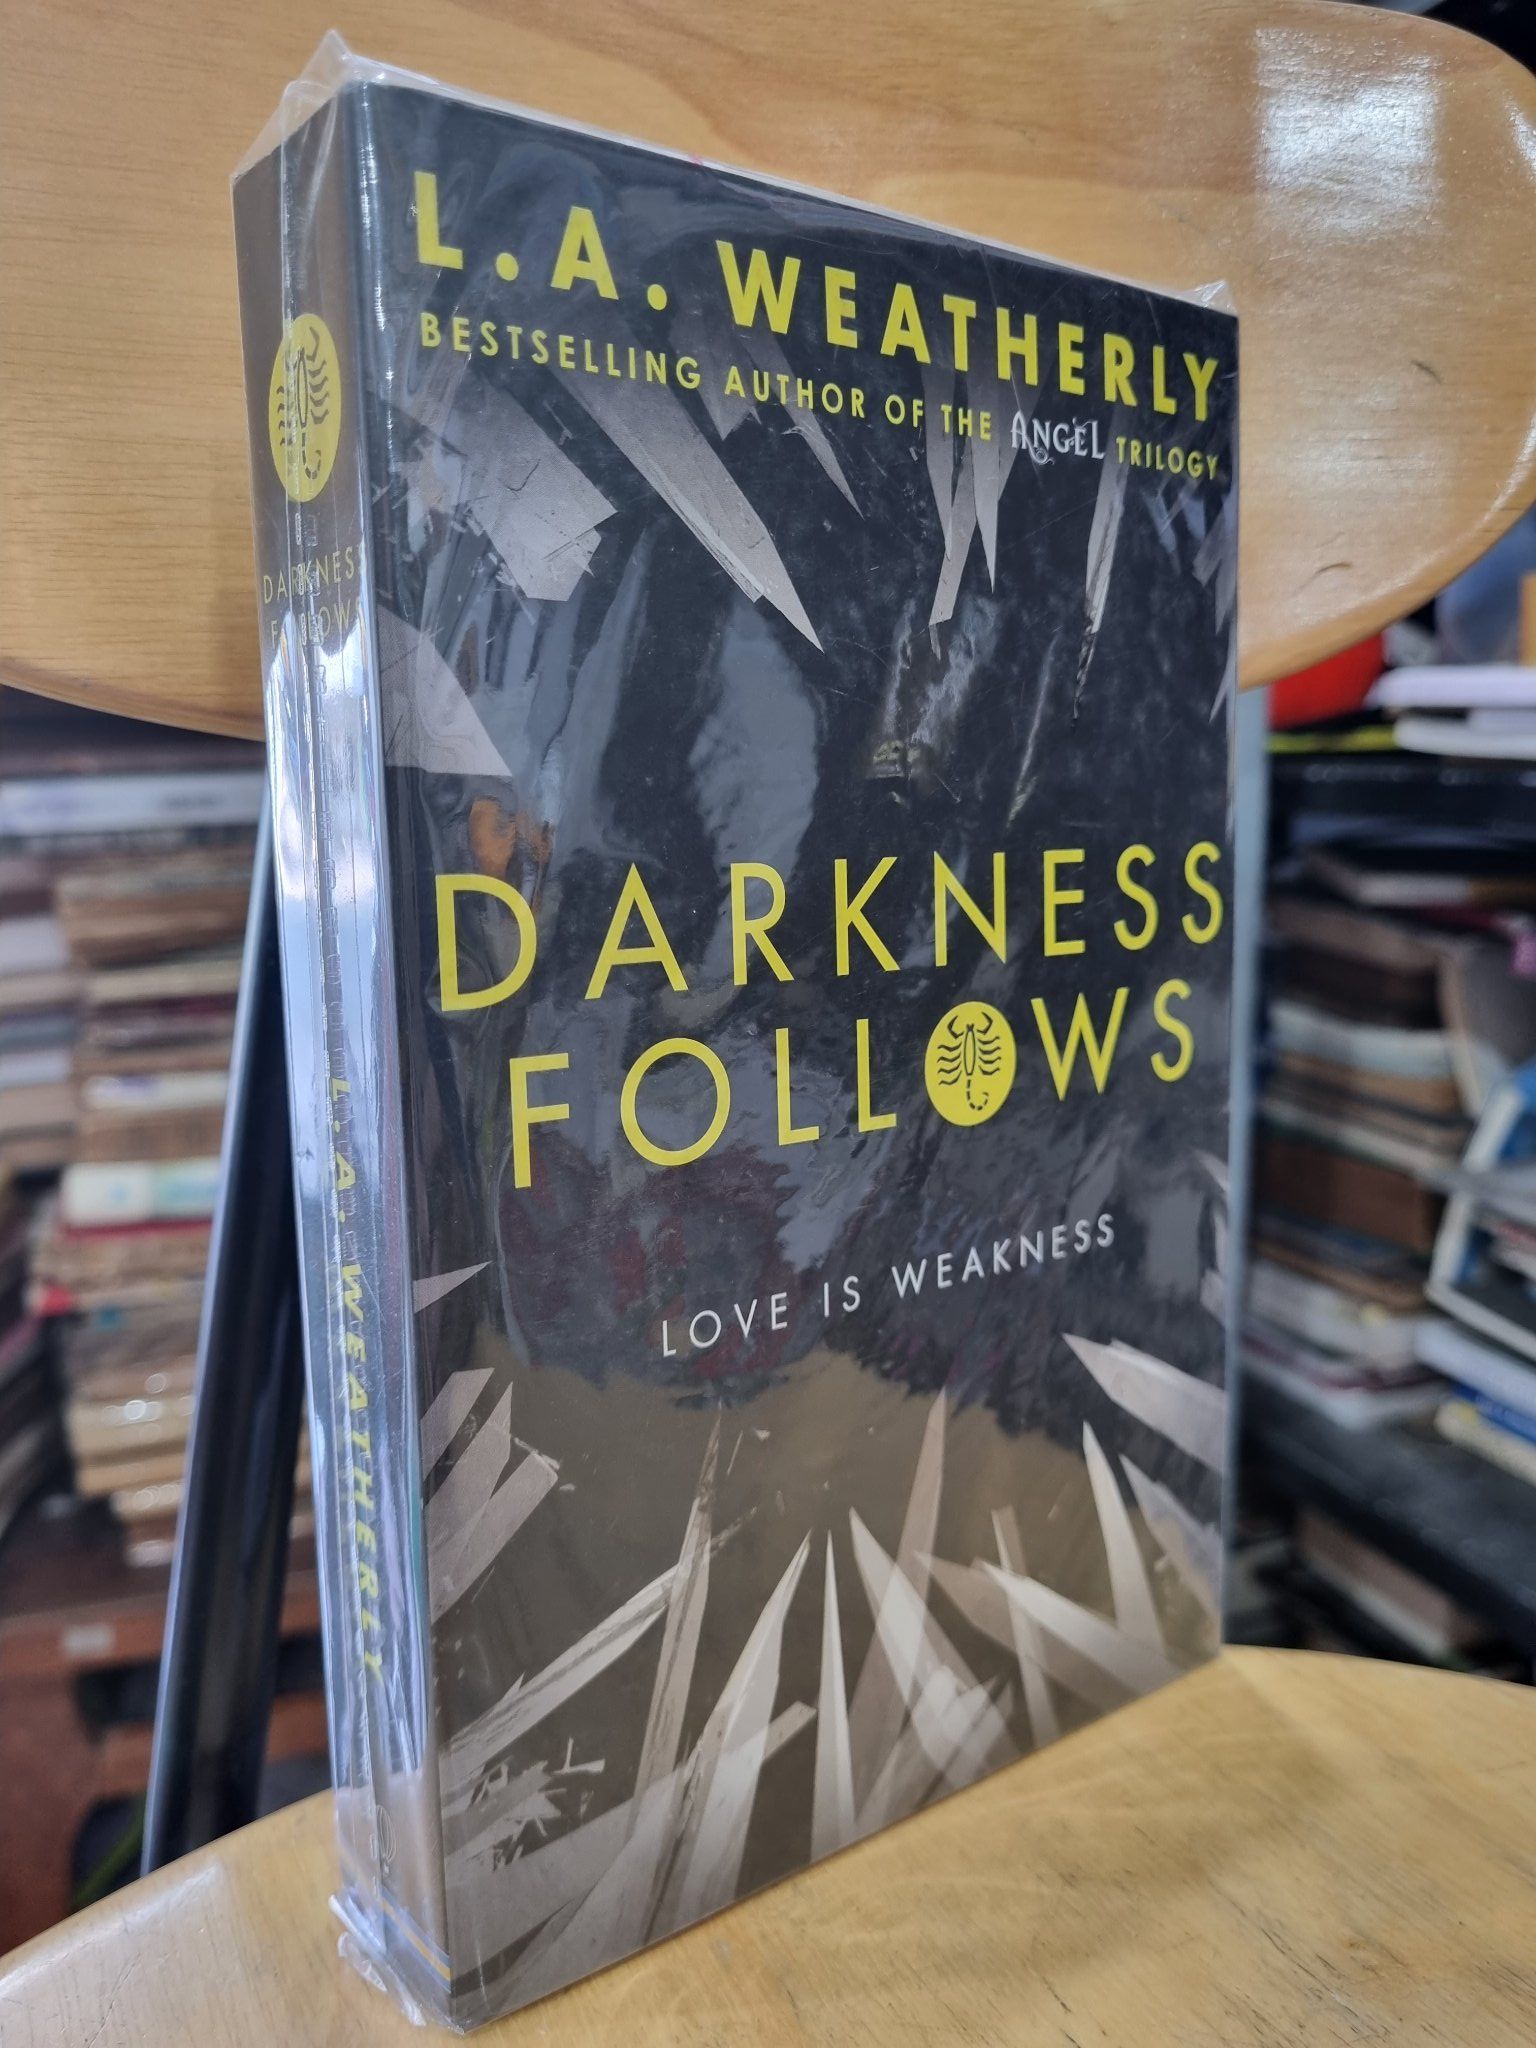  DARKNESS FOLLOWS : LOVE IS WEAKNESS (L. A.  WEATHERLY) 